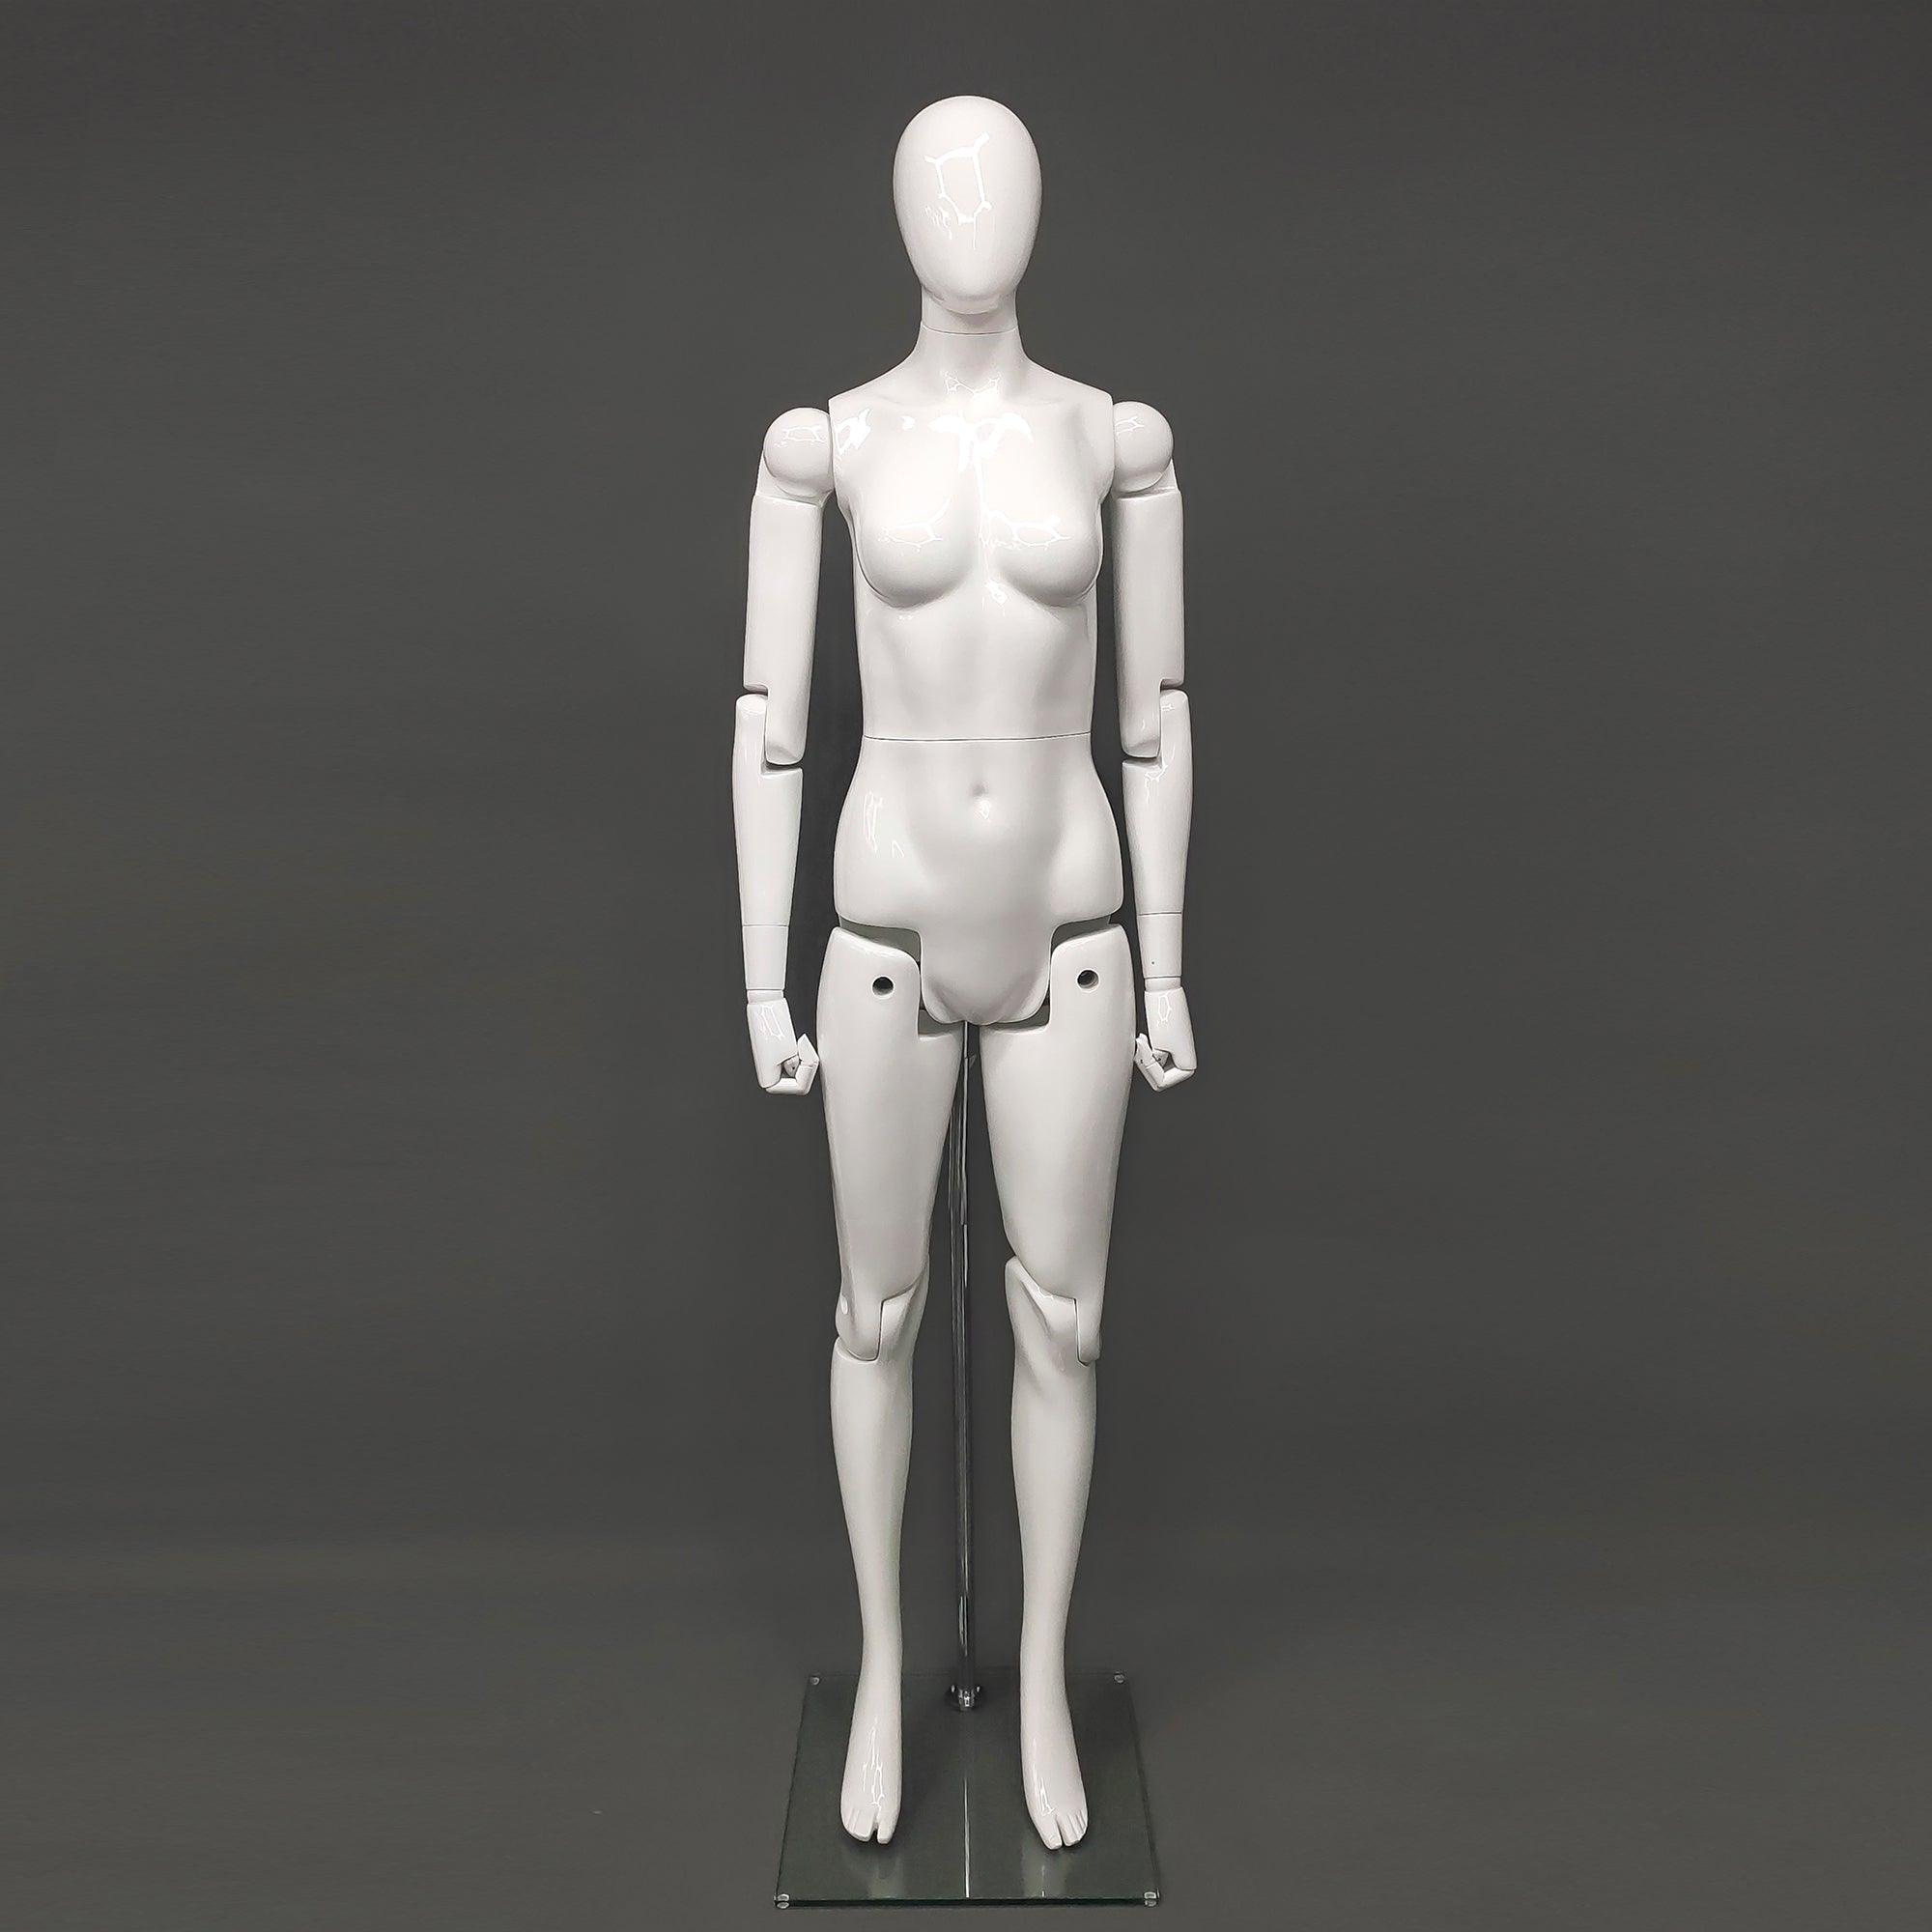 Female Abstract Mannequin in Sitting Pose (AP Series)